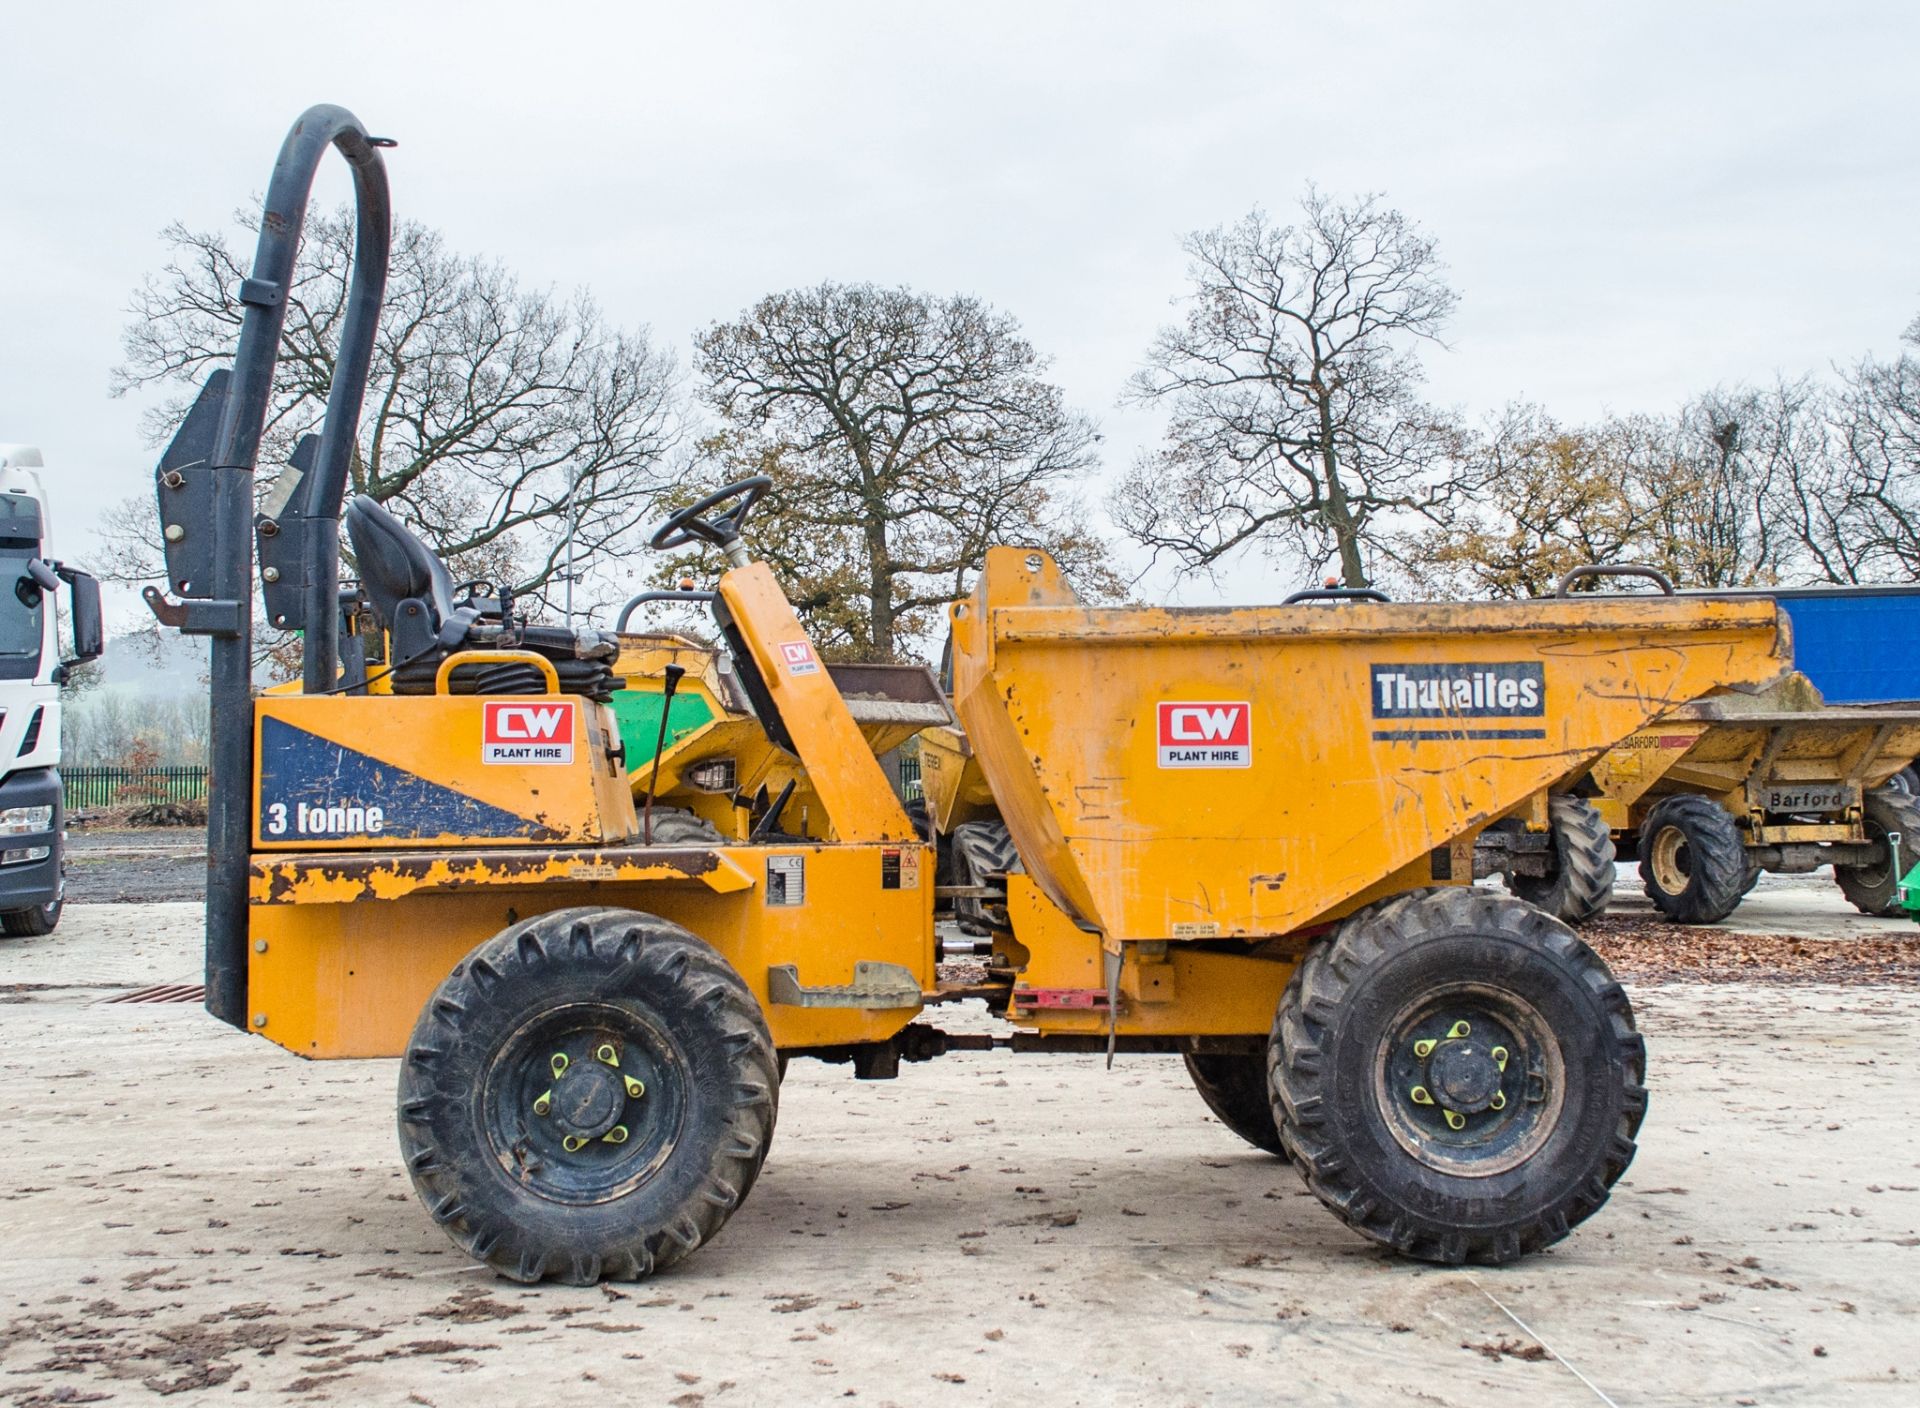 Thwaites 3 tonne straight skip dumper Year: 2016 S/N: 1610D3798 Recorded Hours: Not displayed (Clock - Image 8 of 23